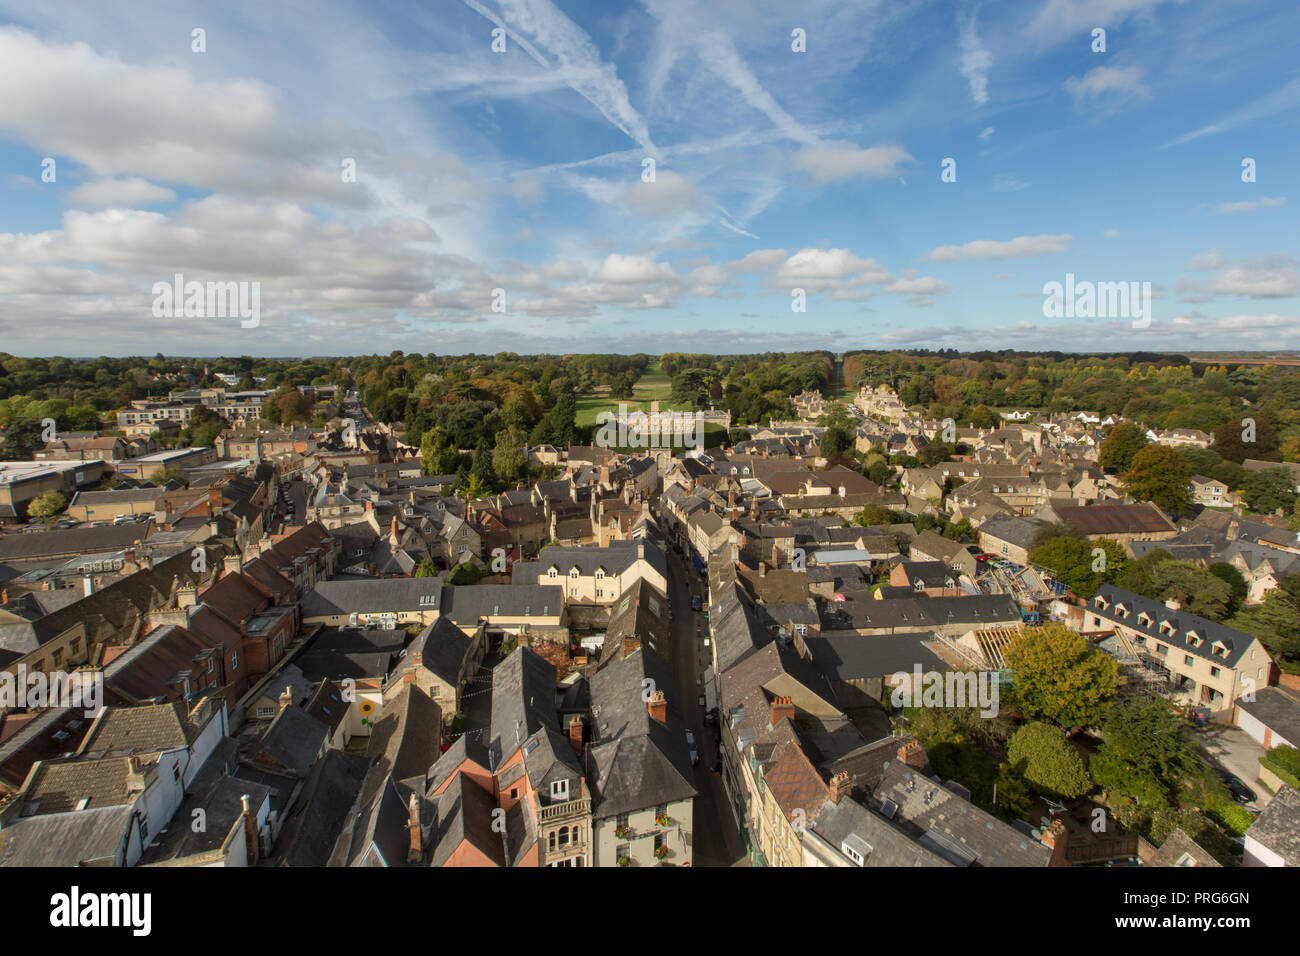 Cirencester town centre on market day aerial photo. Cirencester is in Gloucestershire and in the Heart of the Cotswolds. Stock Photo